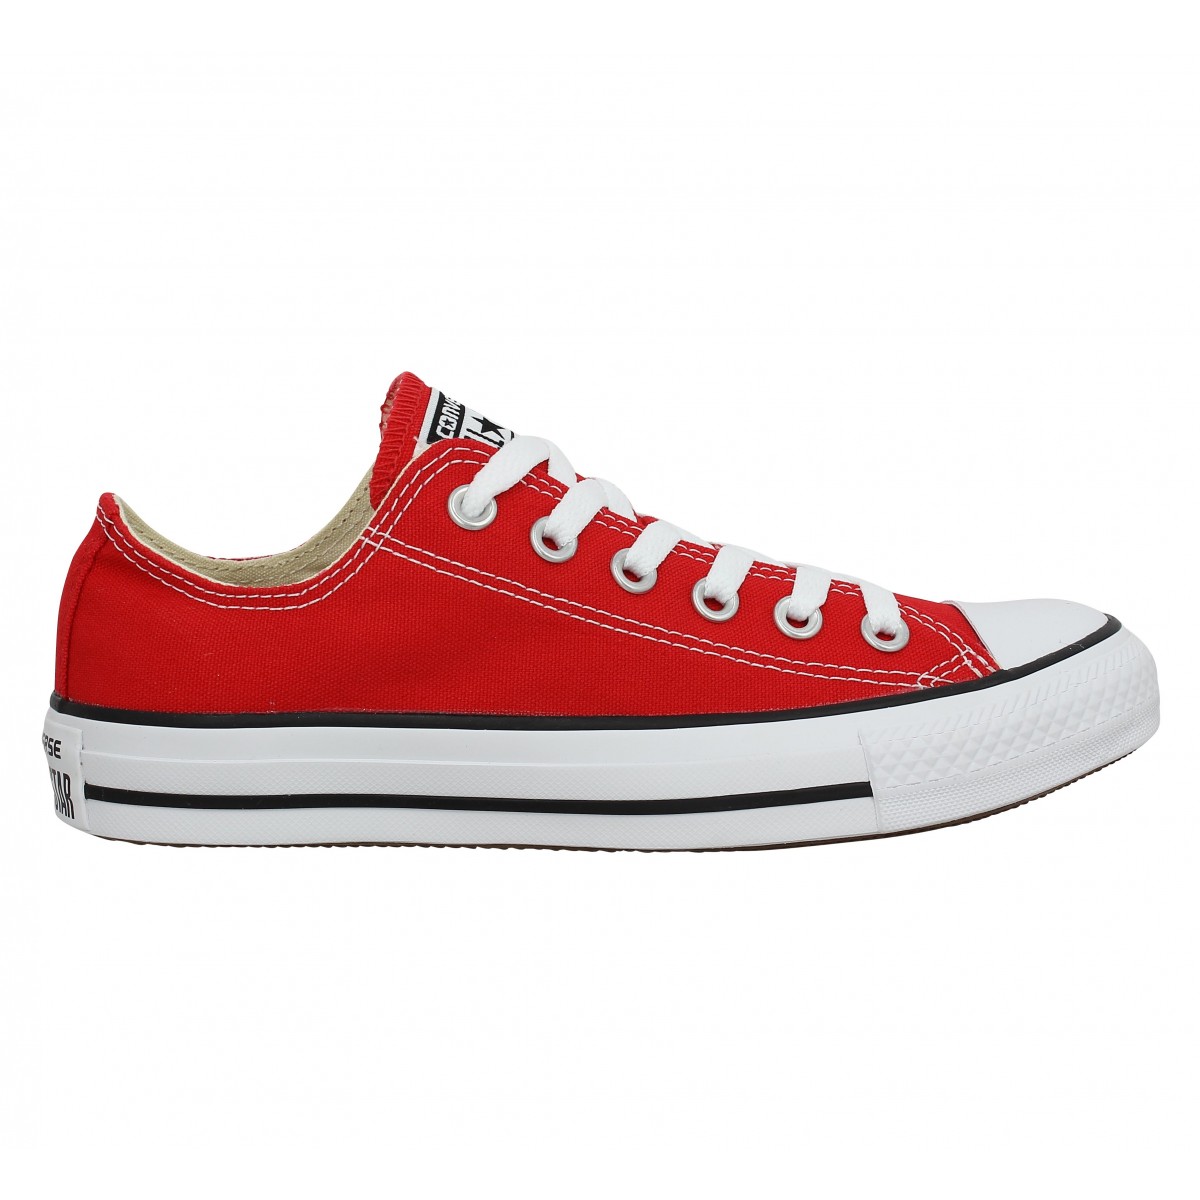 Converse 15810 toile femme rouge | Fanny chaussures